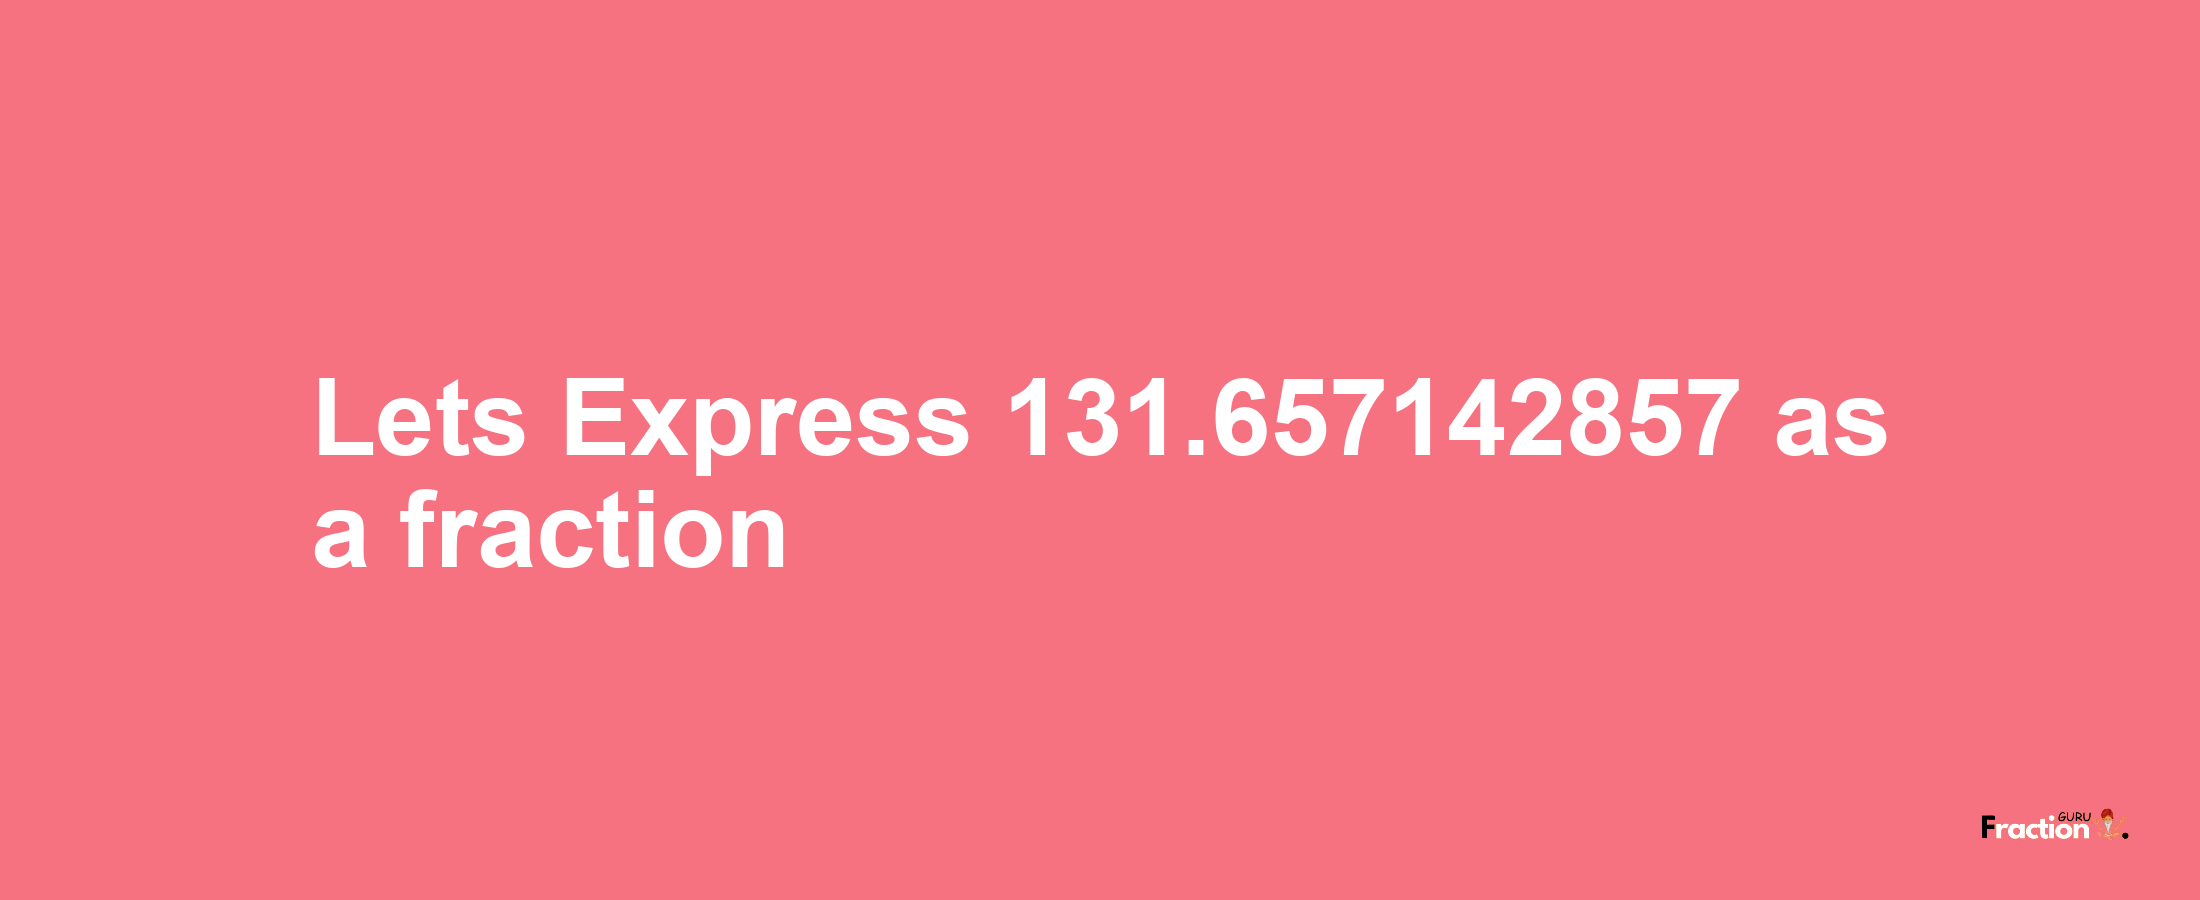 Lets Express 131.657142857 as afraction